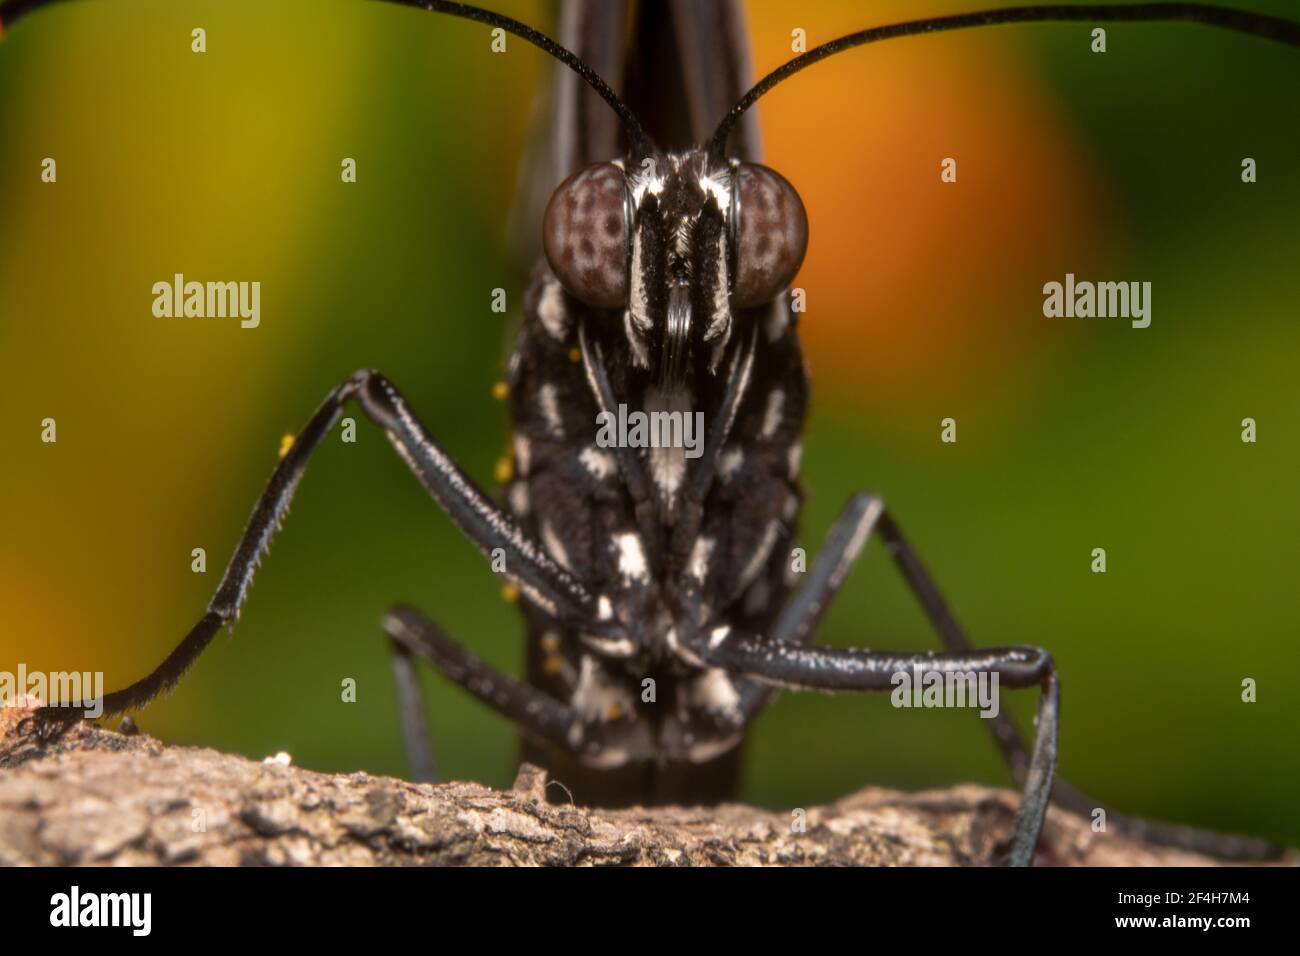 Black butterfly with big eyes and strong legs Stock Photo